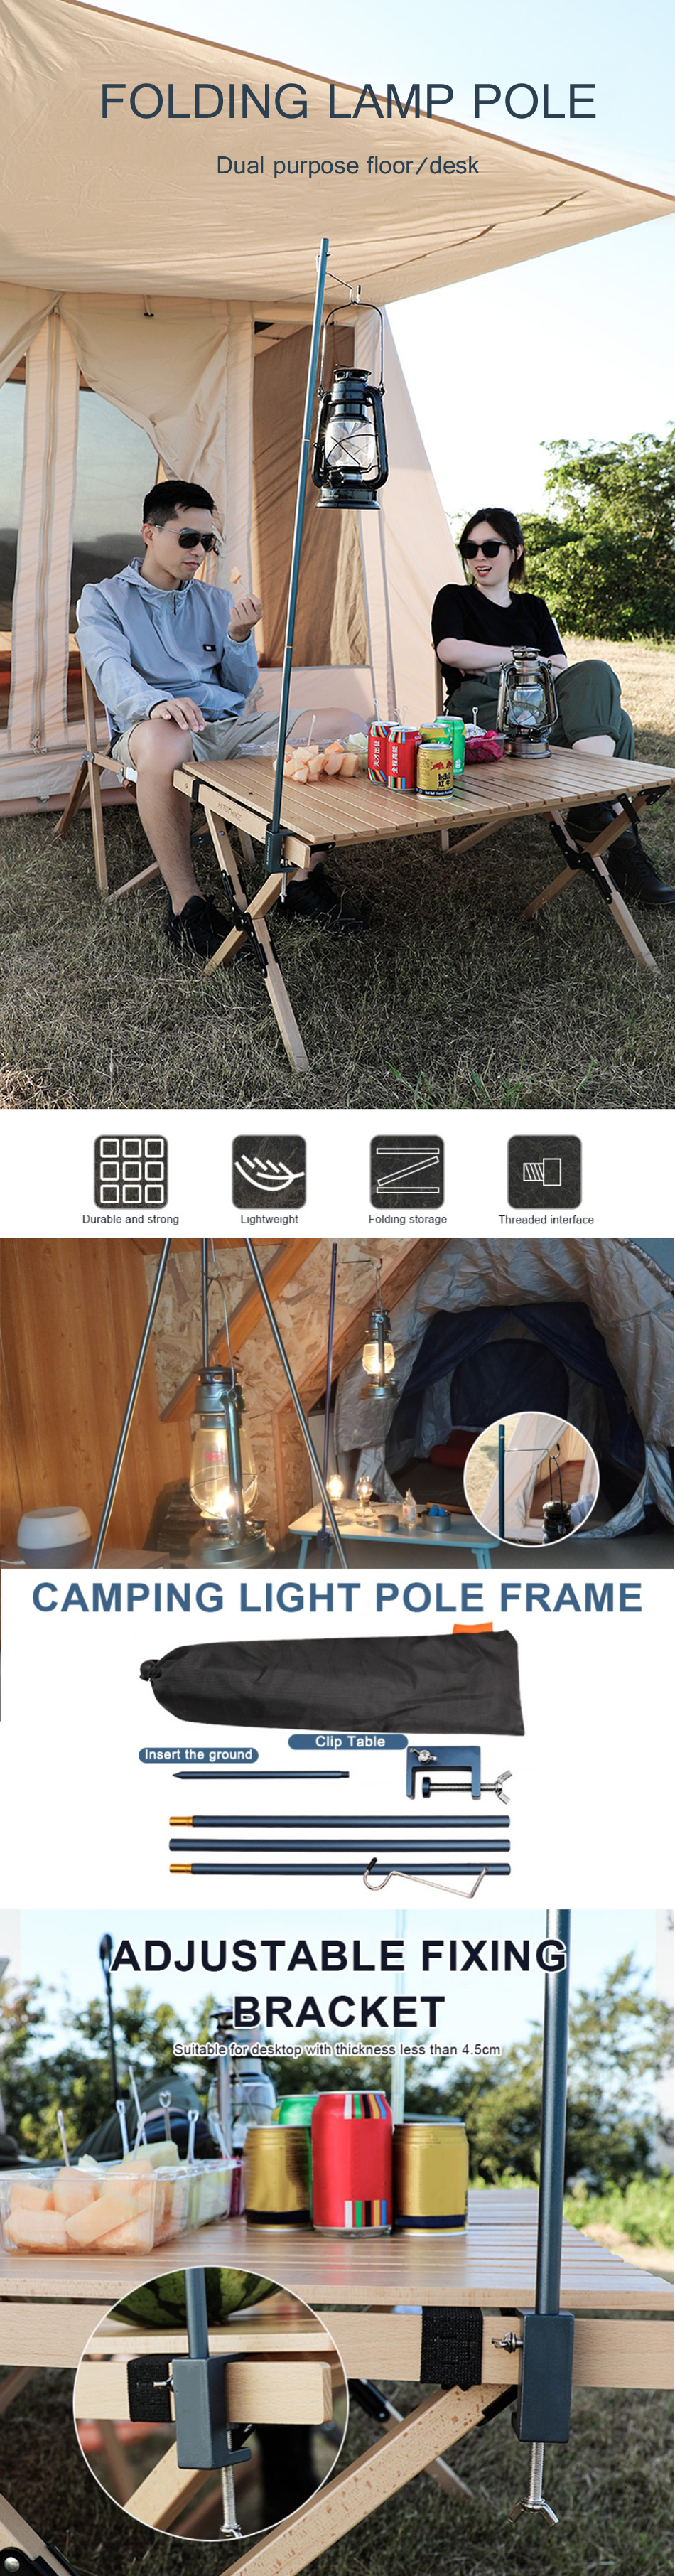 Detachable-Camping-Lamp-Holder-Outdoor-Lantern-Stand-Pole-Camping-Light-Bracket-Hanging-Light-Fixing-1787468-1